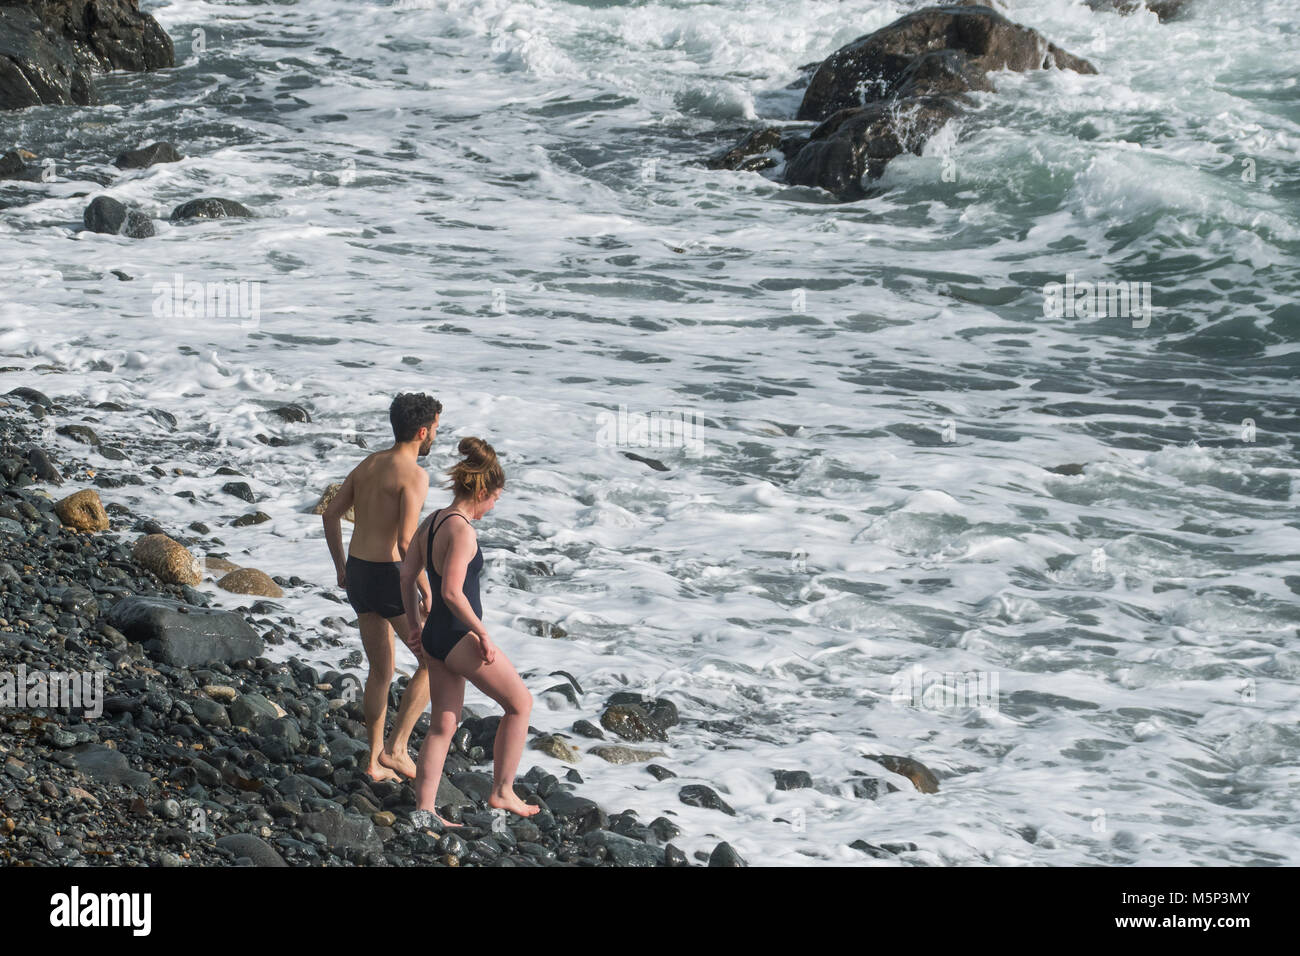 Mousehole, Cornwall, UK. 25th Feb 2018. UK Weather. Sunday was a freezing cold day in Cornwall, with strong winds from the 'beast in the east'. Neverthless this hardy couple decided to strip off and go for a invigorating paddle in the sea. Credit: cwallpix/Alamy Live News Stock Photo